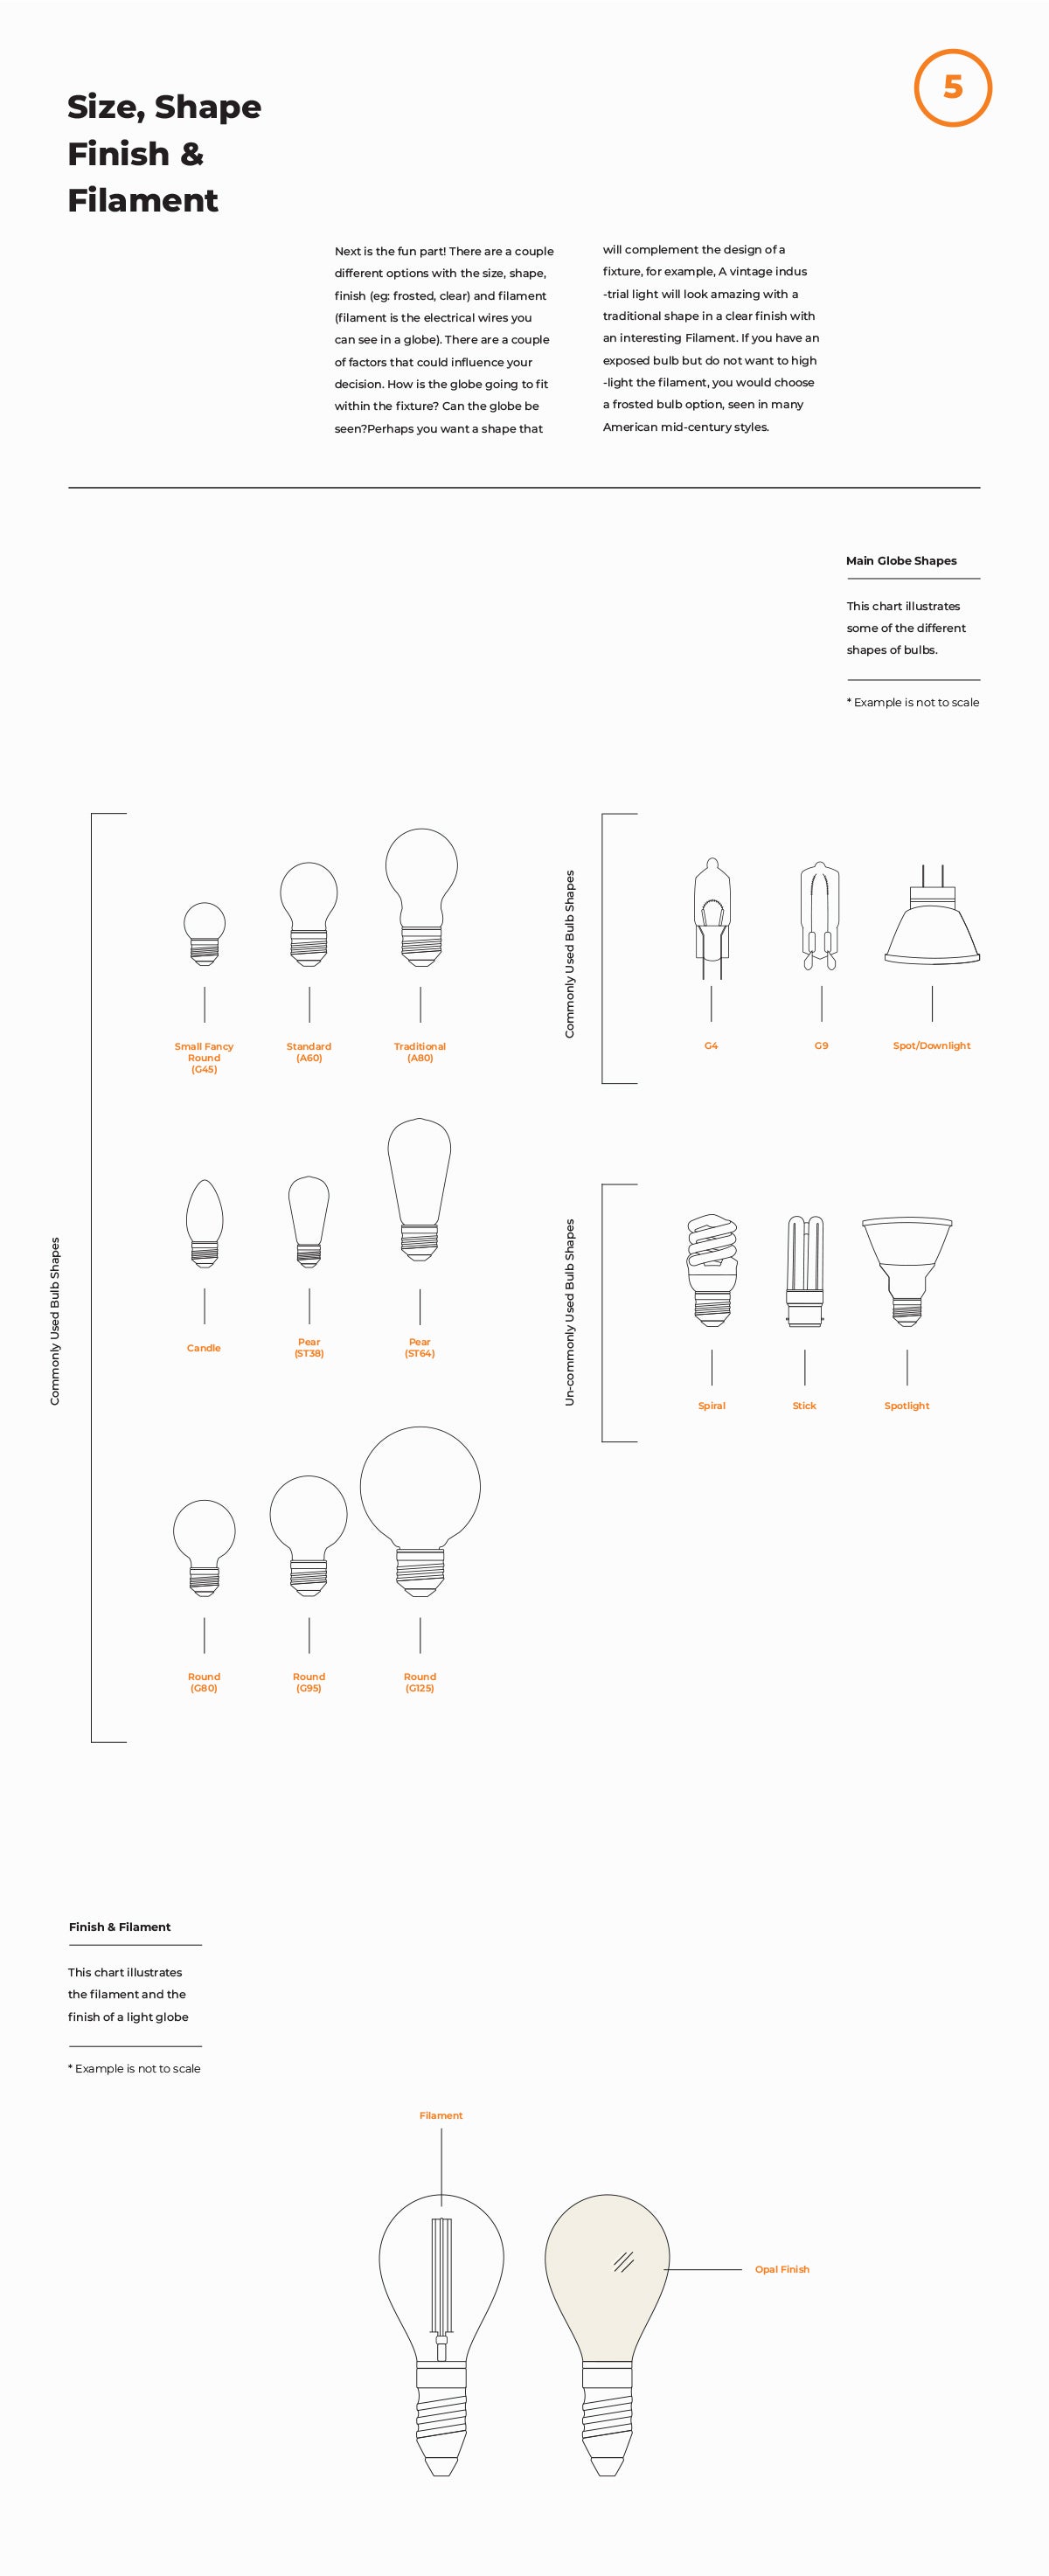 Size, Shape, Finish and Filament of your Light Bulb 